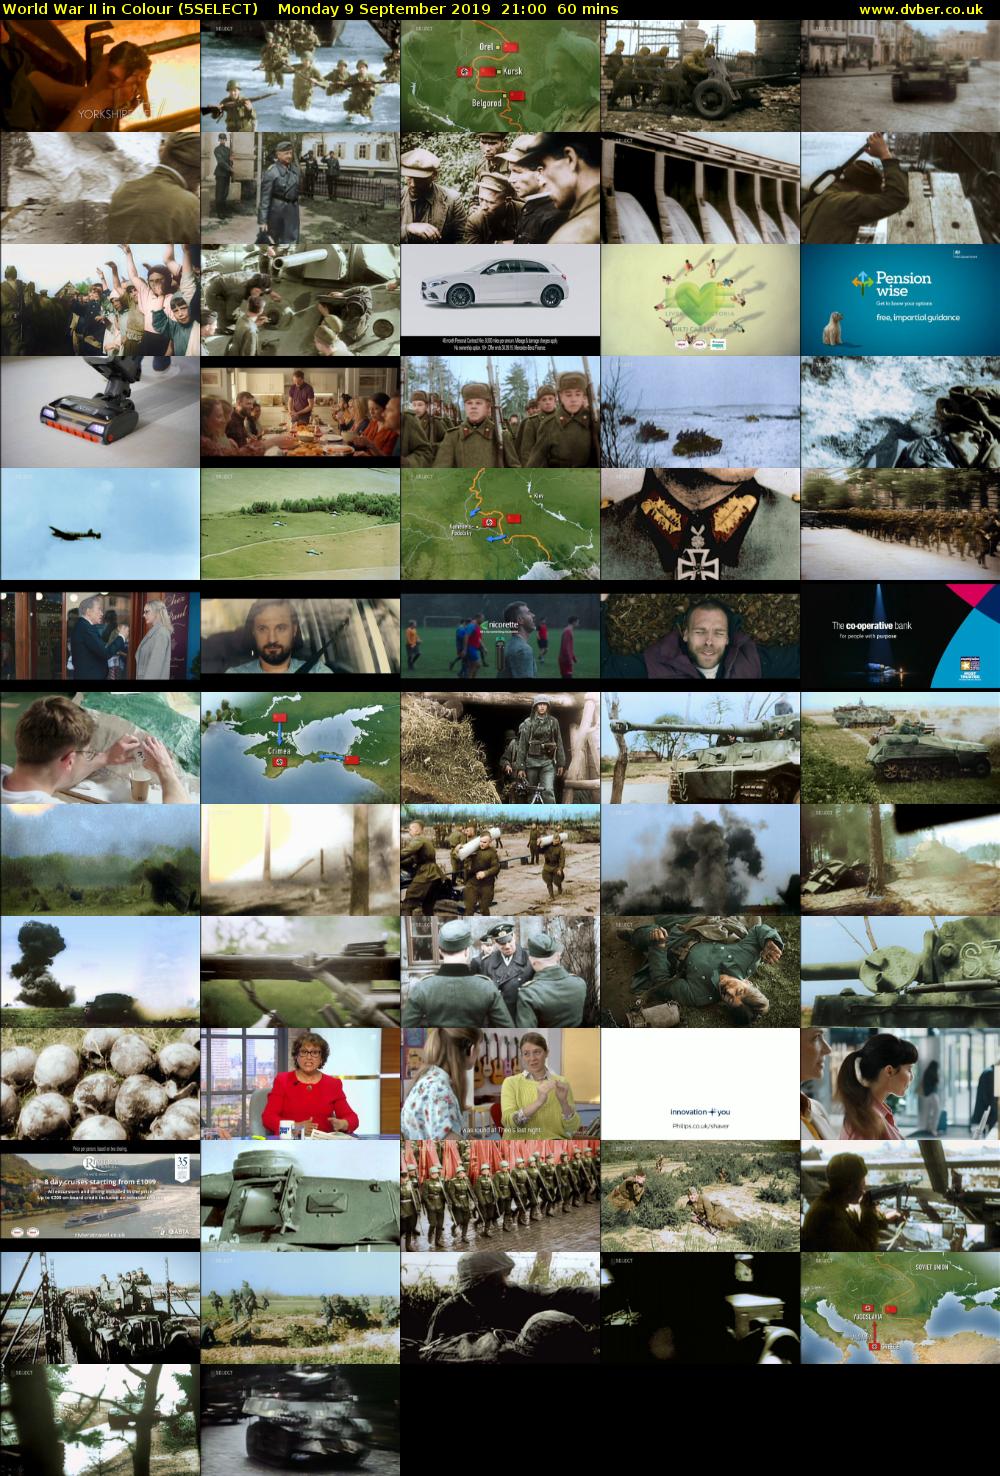 World War II in Colour (5SELECT) Monday 9 September 2019 21:00 - 22:00